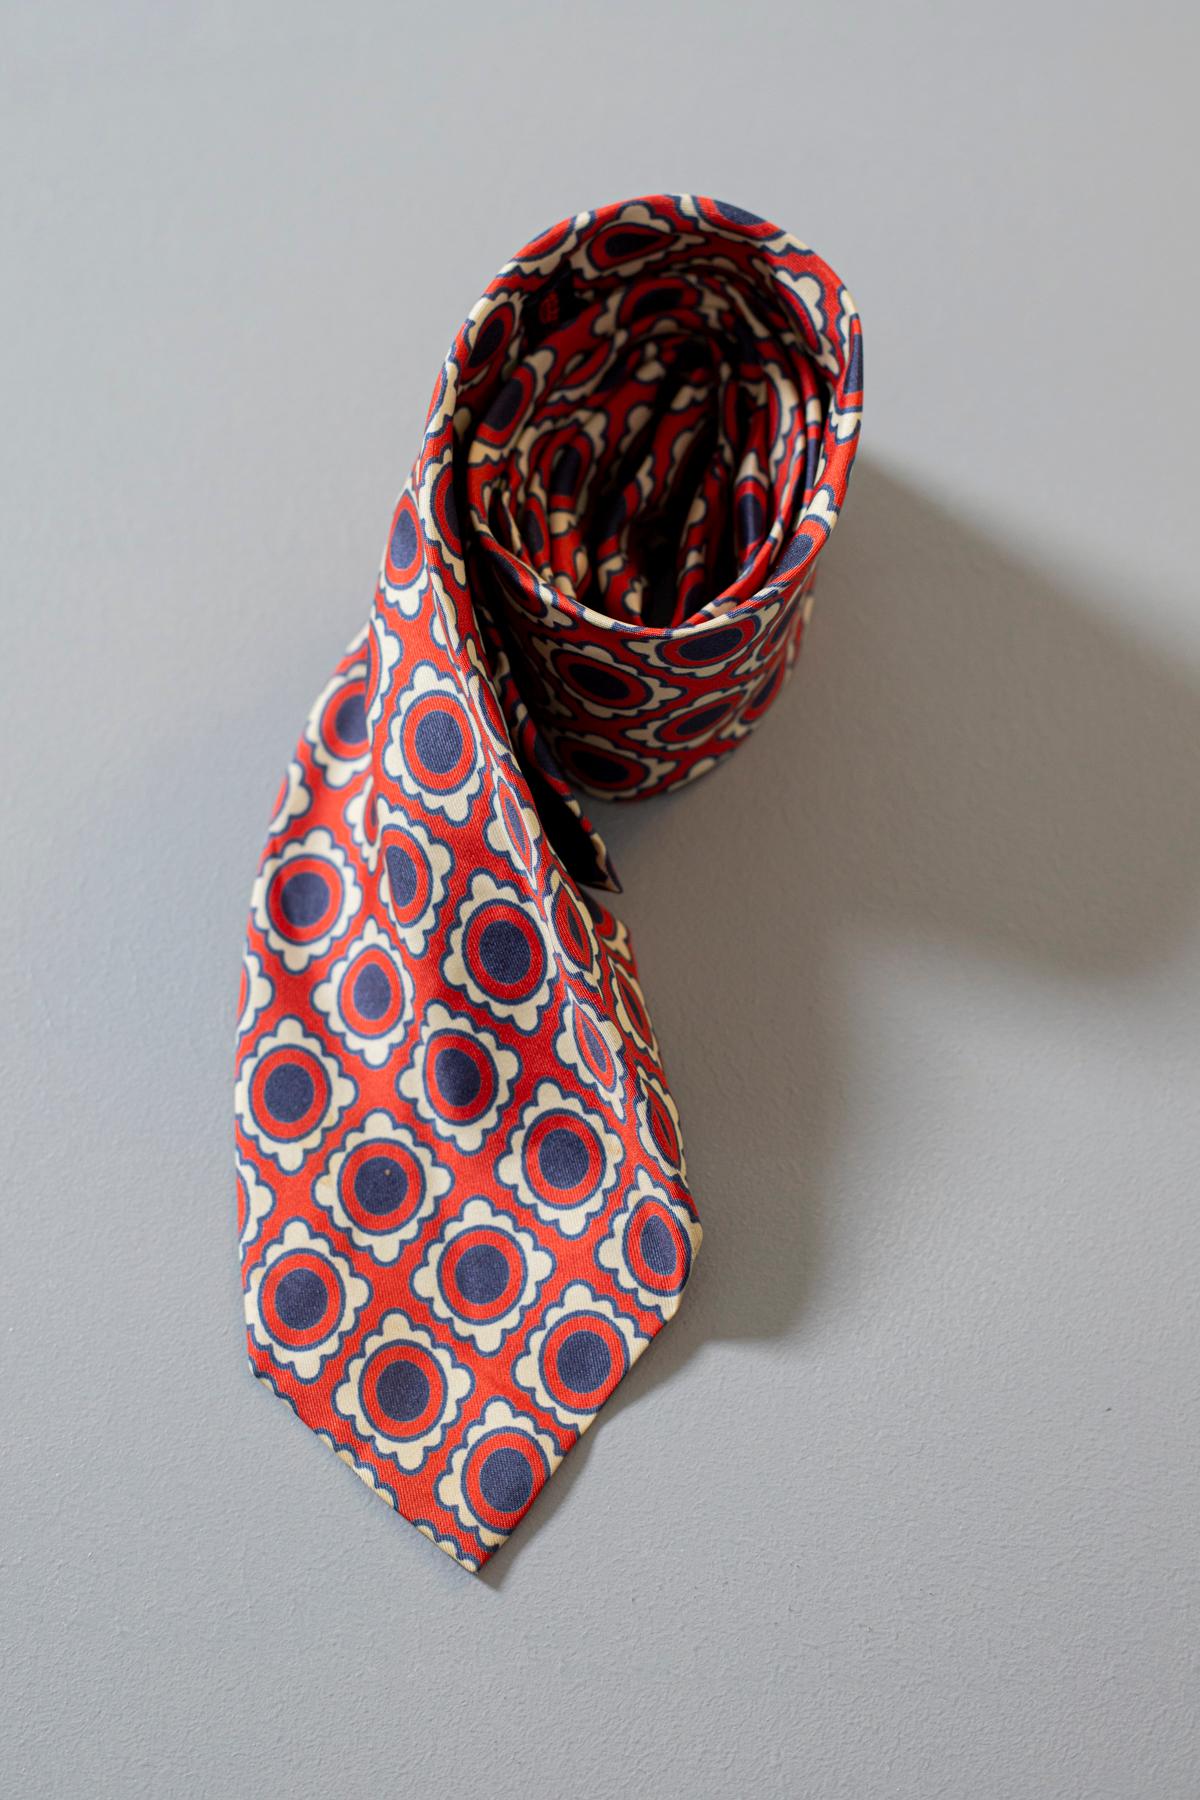 Unique, inimitable, elegant, this tie designed by U Pavesi Milano is made of 100% silk. Decorated with small blue circles on a white frame, the main color of the tie is red, ideal to combine with a dark suit. It is the perfect accessory to make your